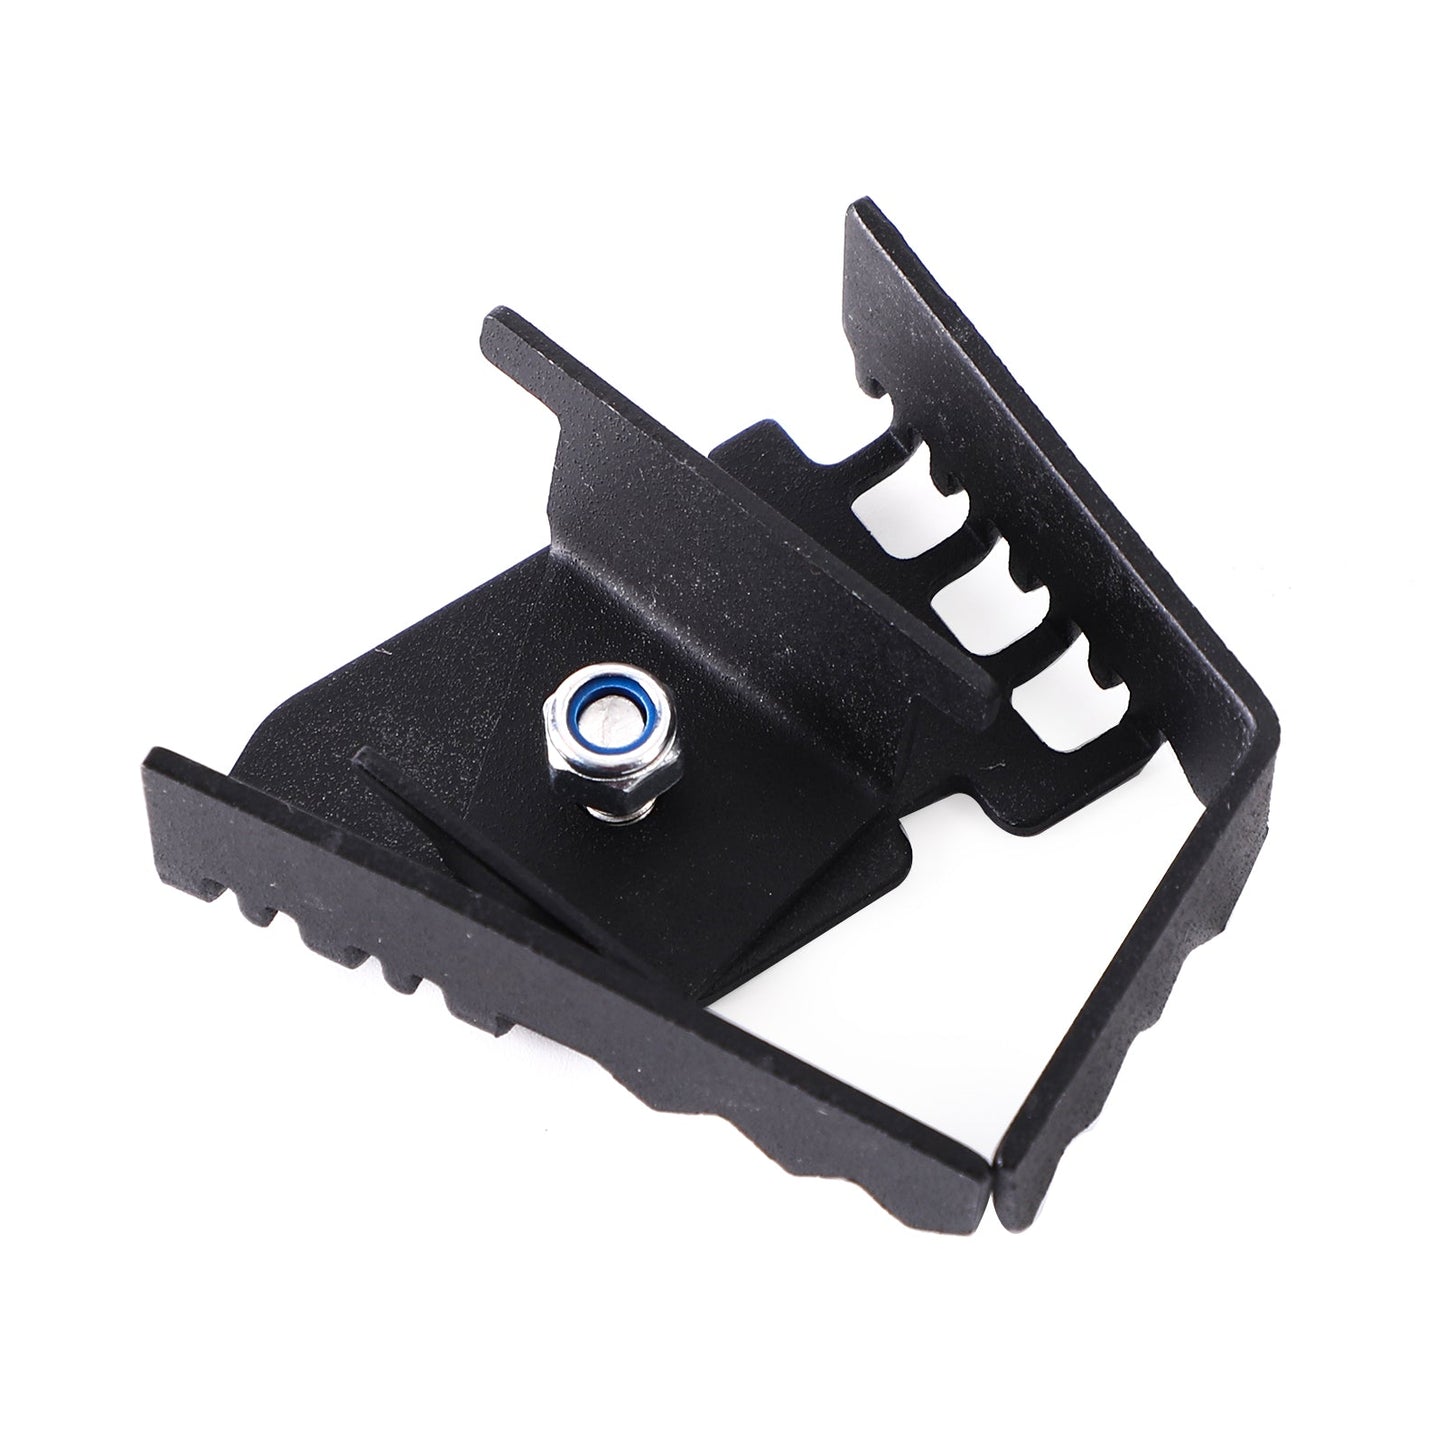 Brake Foot Pedal Extension Enlarge Black For Bmw R1200Gs F800Gs Adv F700 F650Gs